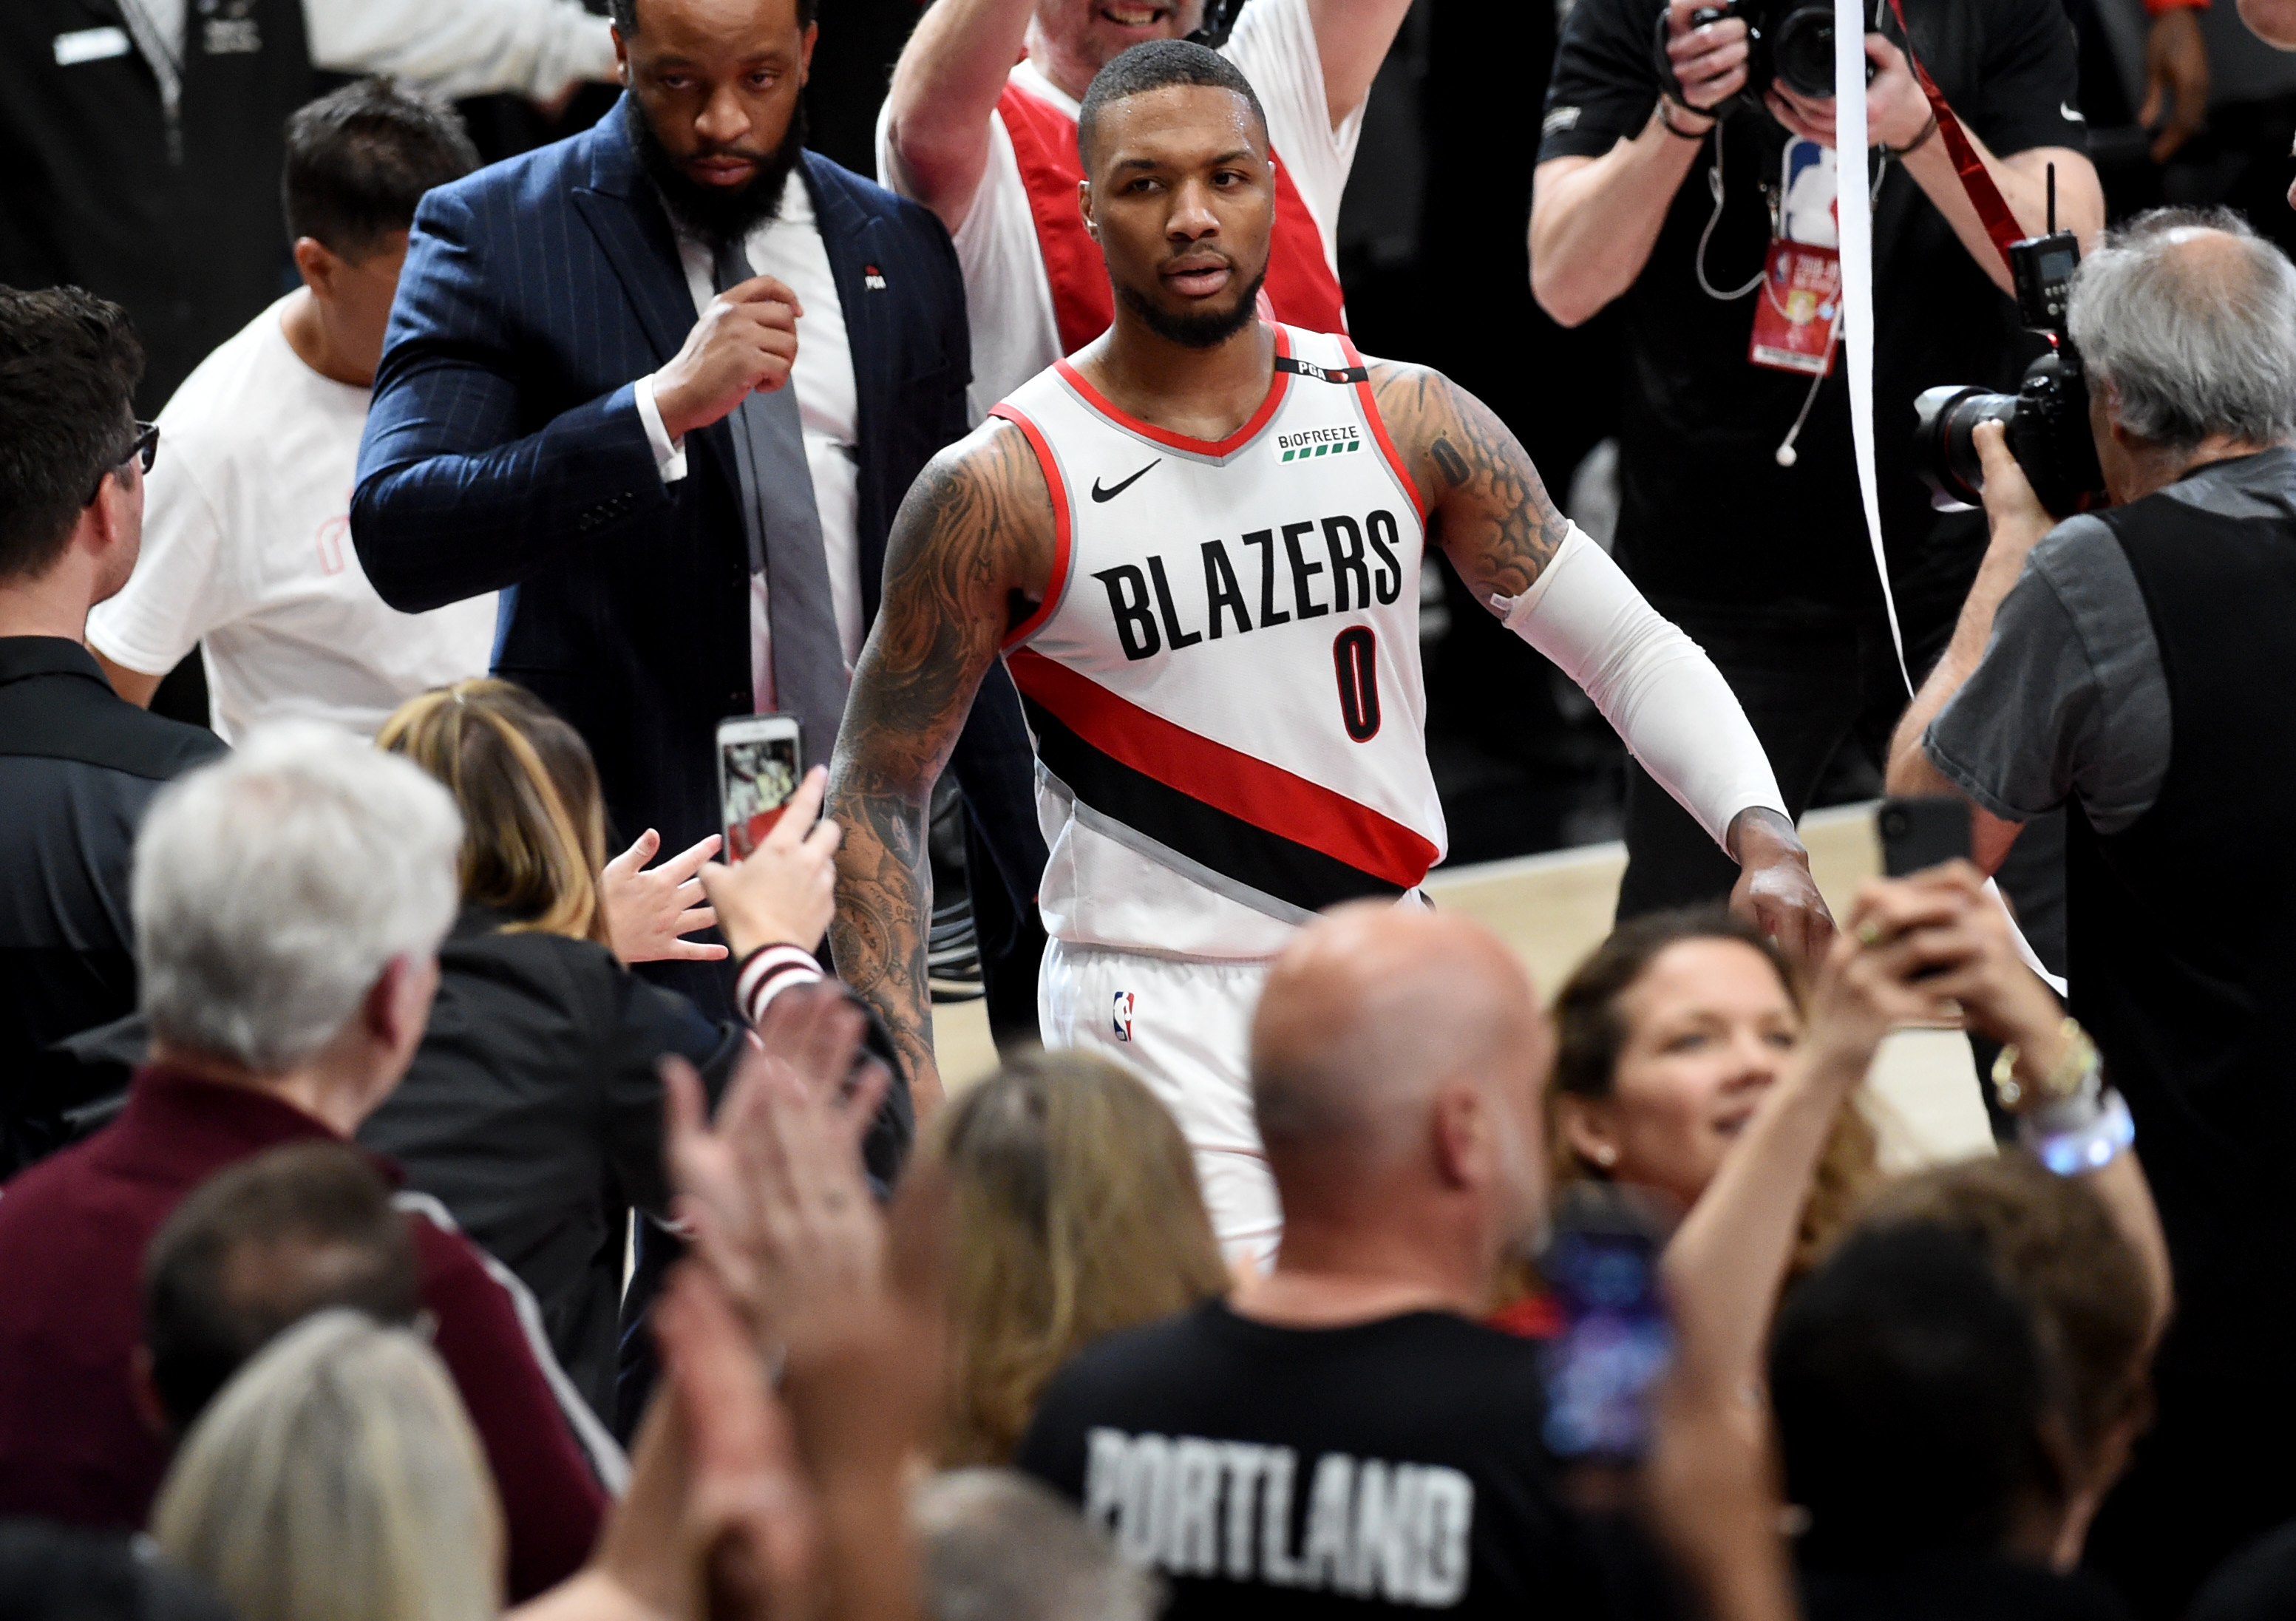 Blazers star Damian Lillard reacts after his game-winning shot against the OKC Thunder in the first round of the 2019 NBA playoffs